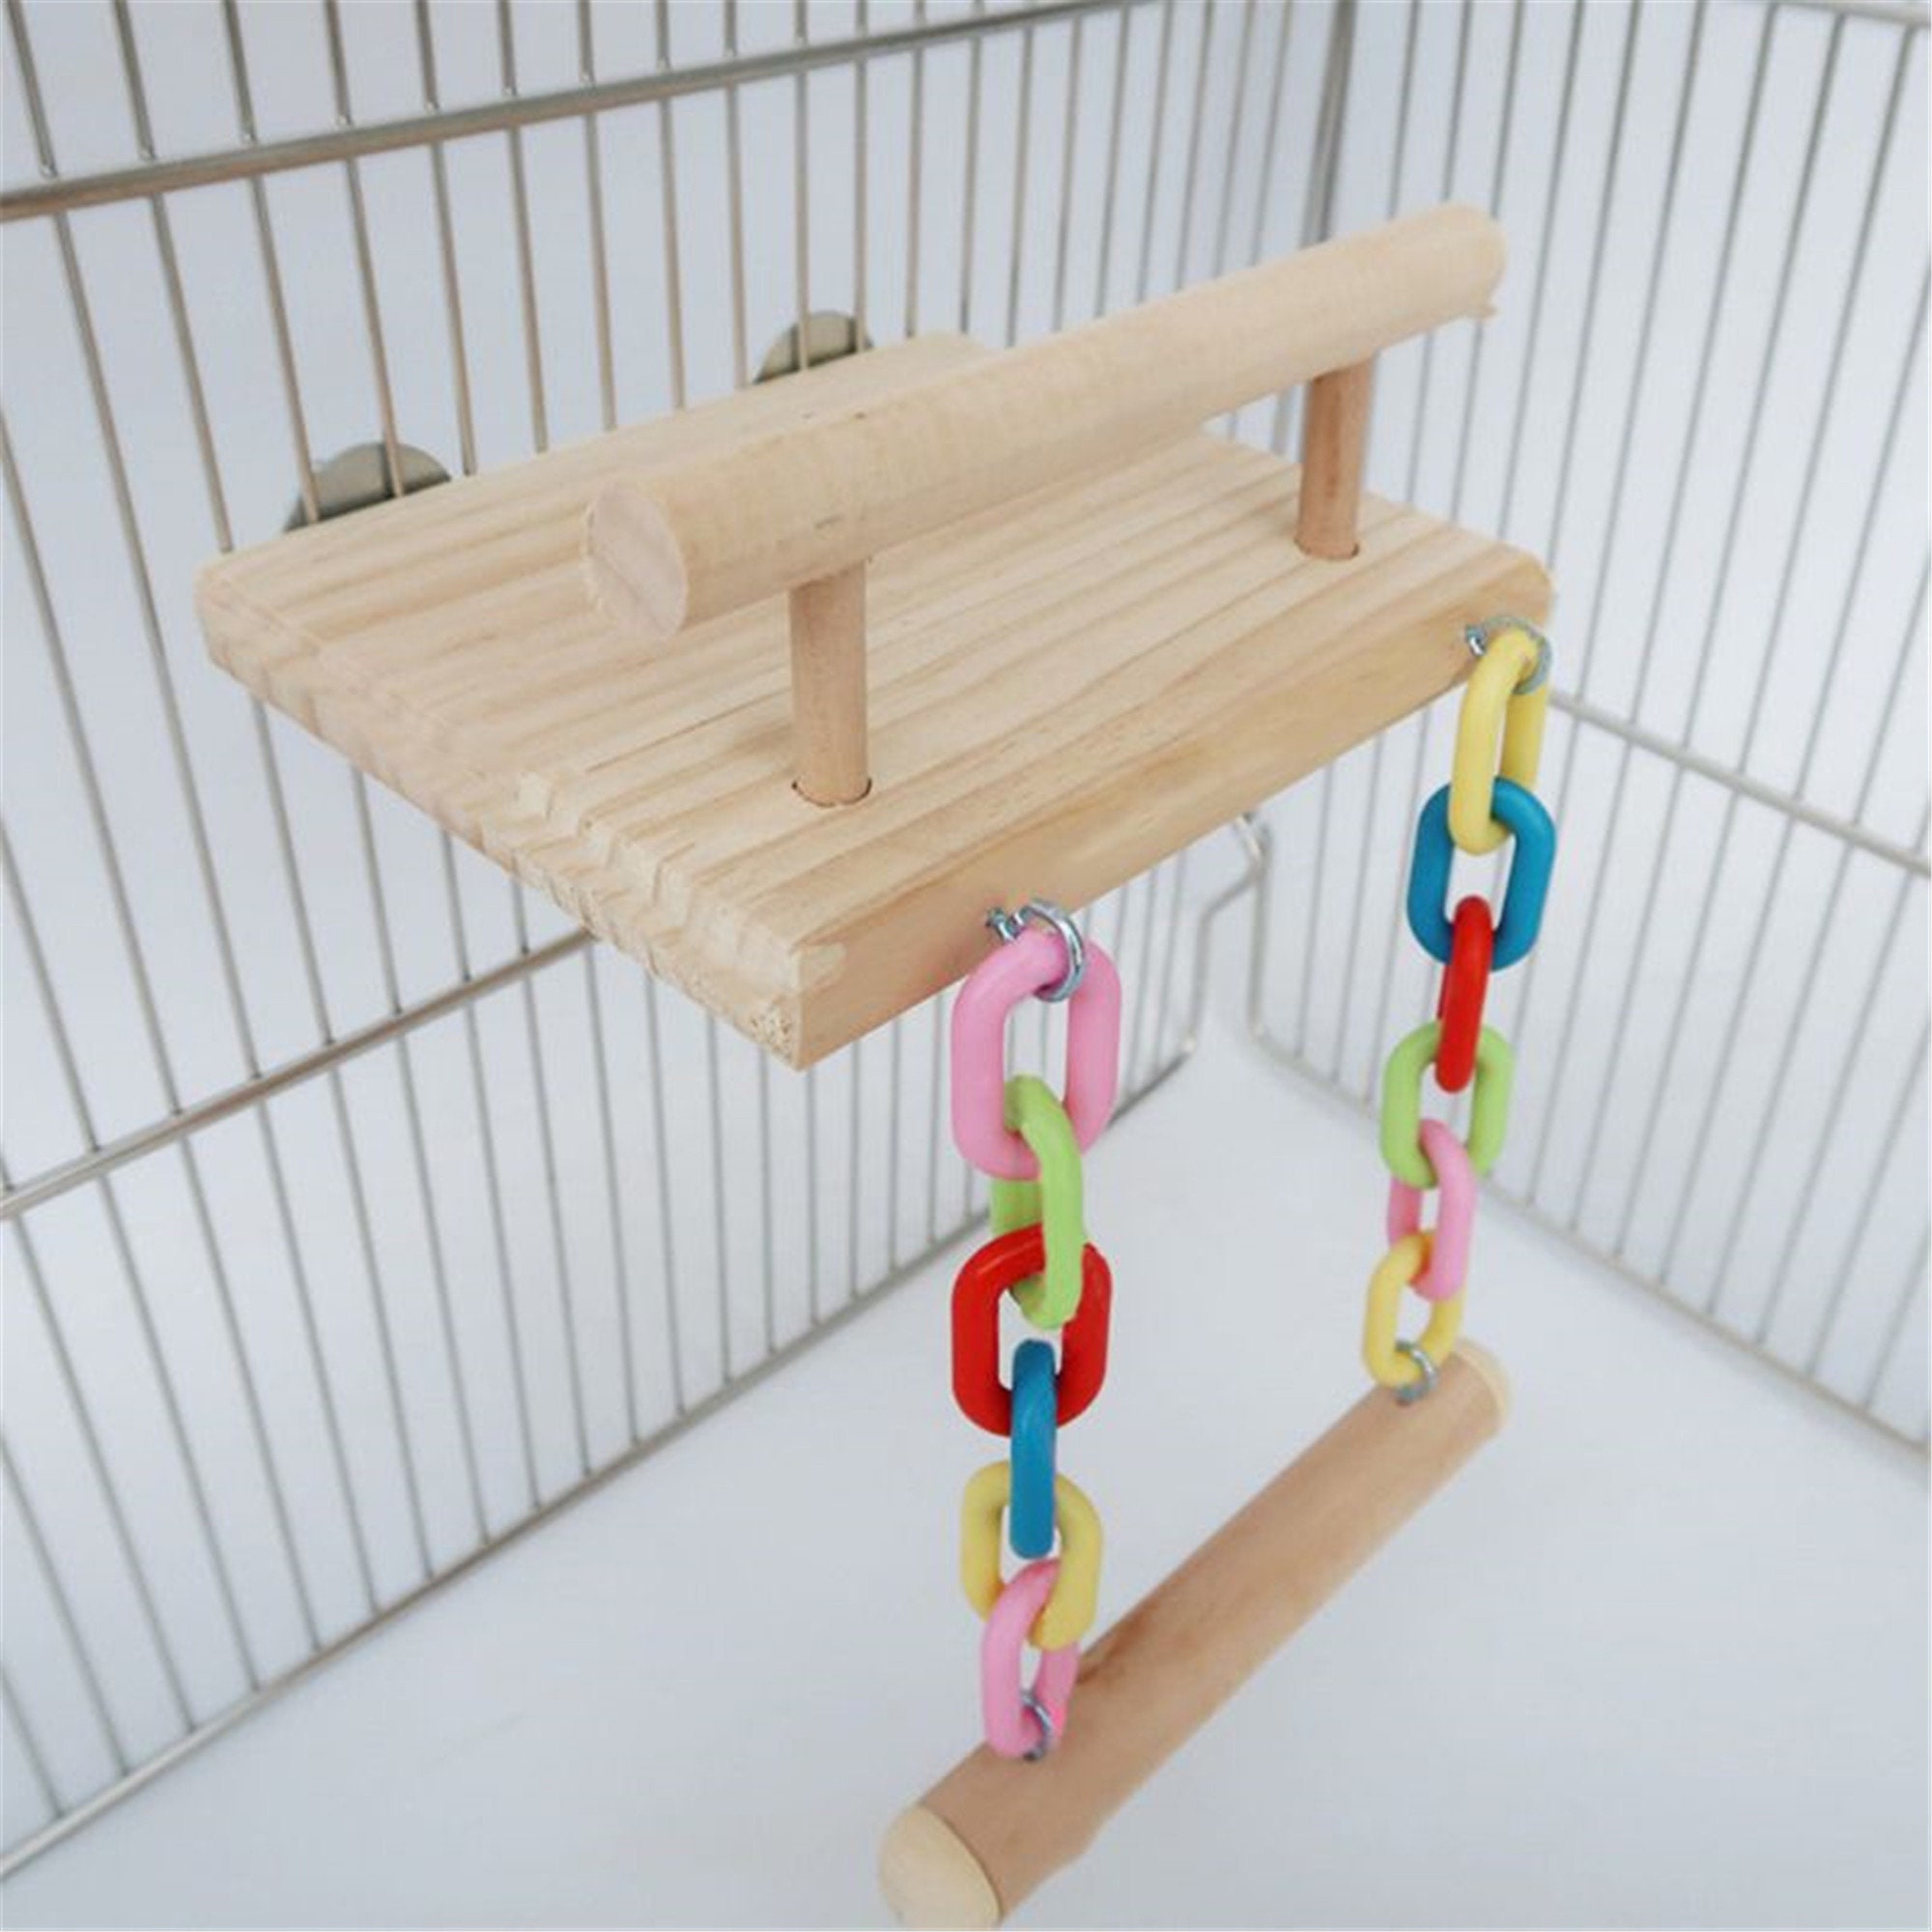 RABBITP Wood Bird Perch-Toys and Accessories for Parrot L Guinea Pig-Hamster Play Stand Platform with Ladder Parakeet Ferret Chinchilla Syrian Hamster 